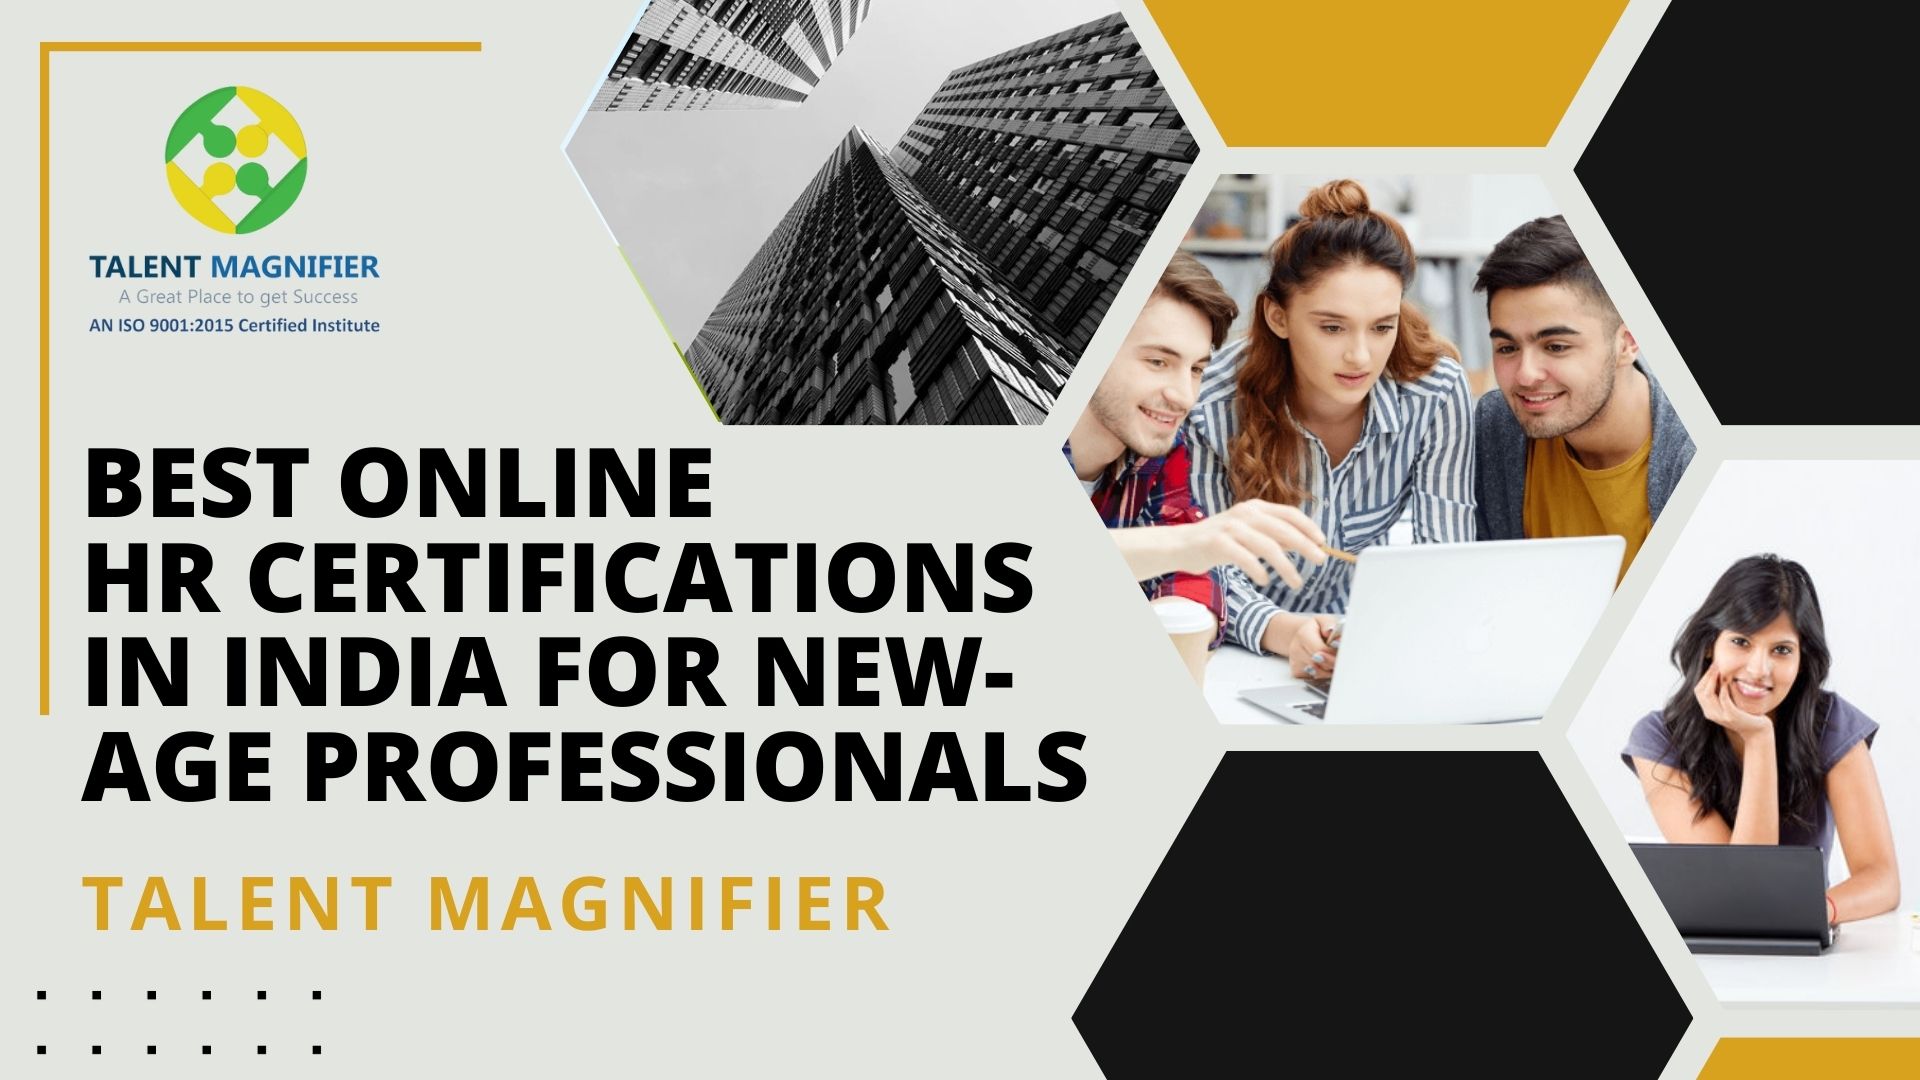 Best Online HR Certifications in India for New-Age Professionals